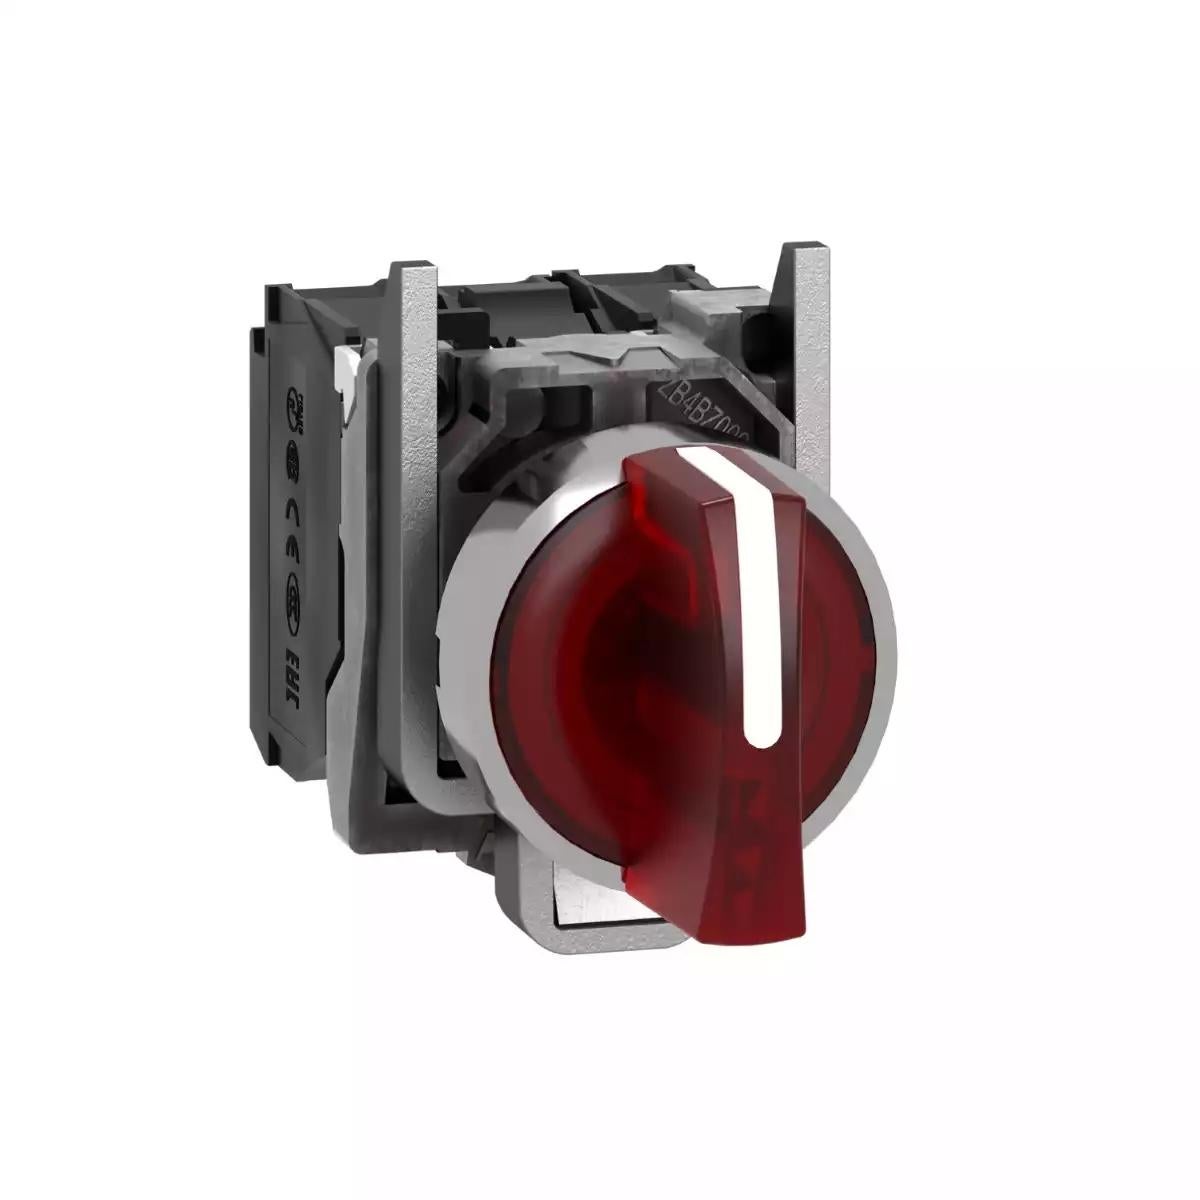 Illuminated selector switch, Harmony XB4, metal, red handle, 22mm, universal LED, 3 positions, 1NO + 1NC, 24V AC DC